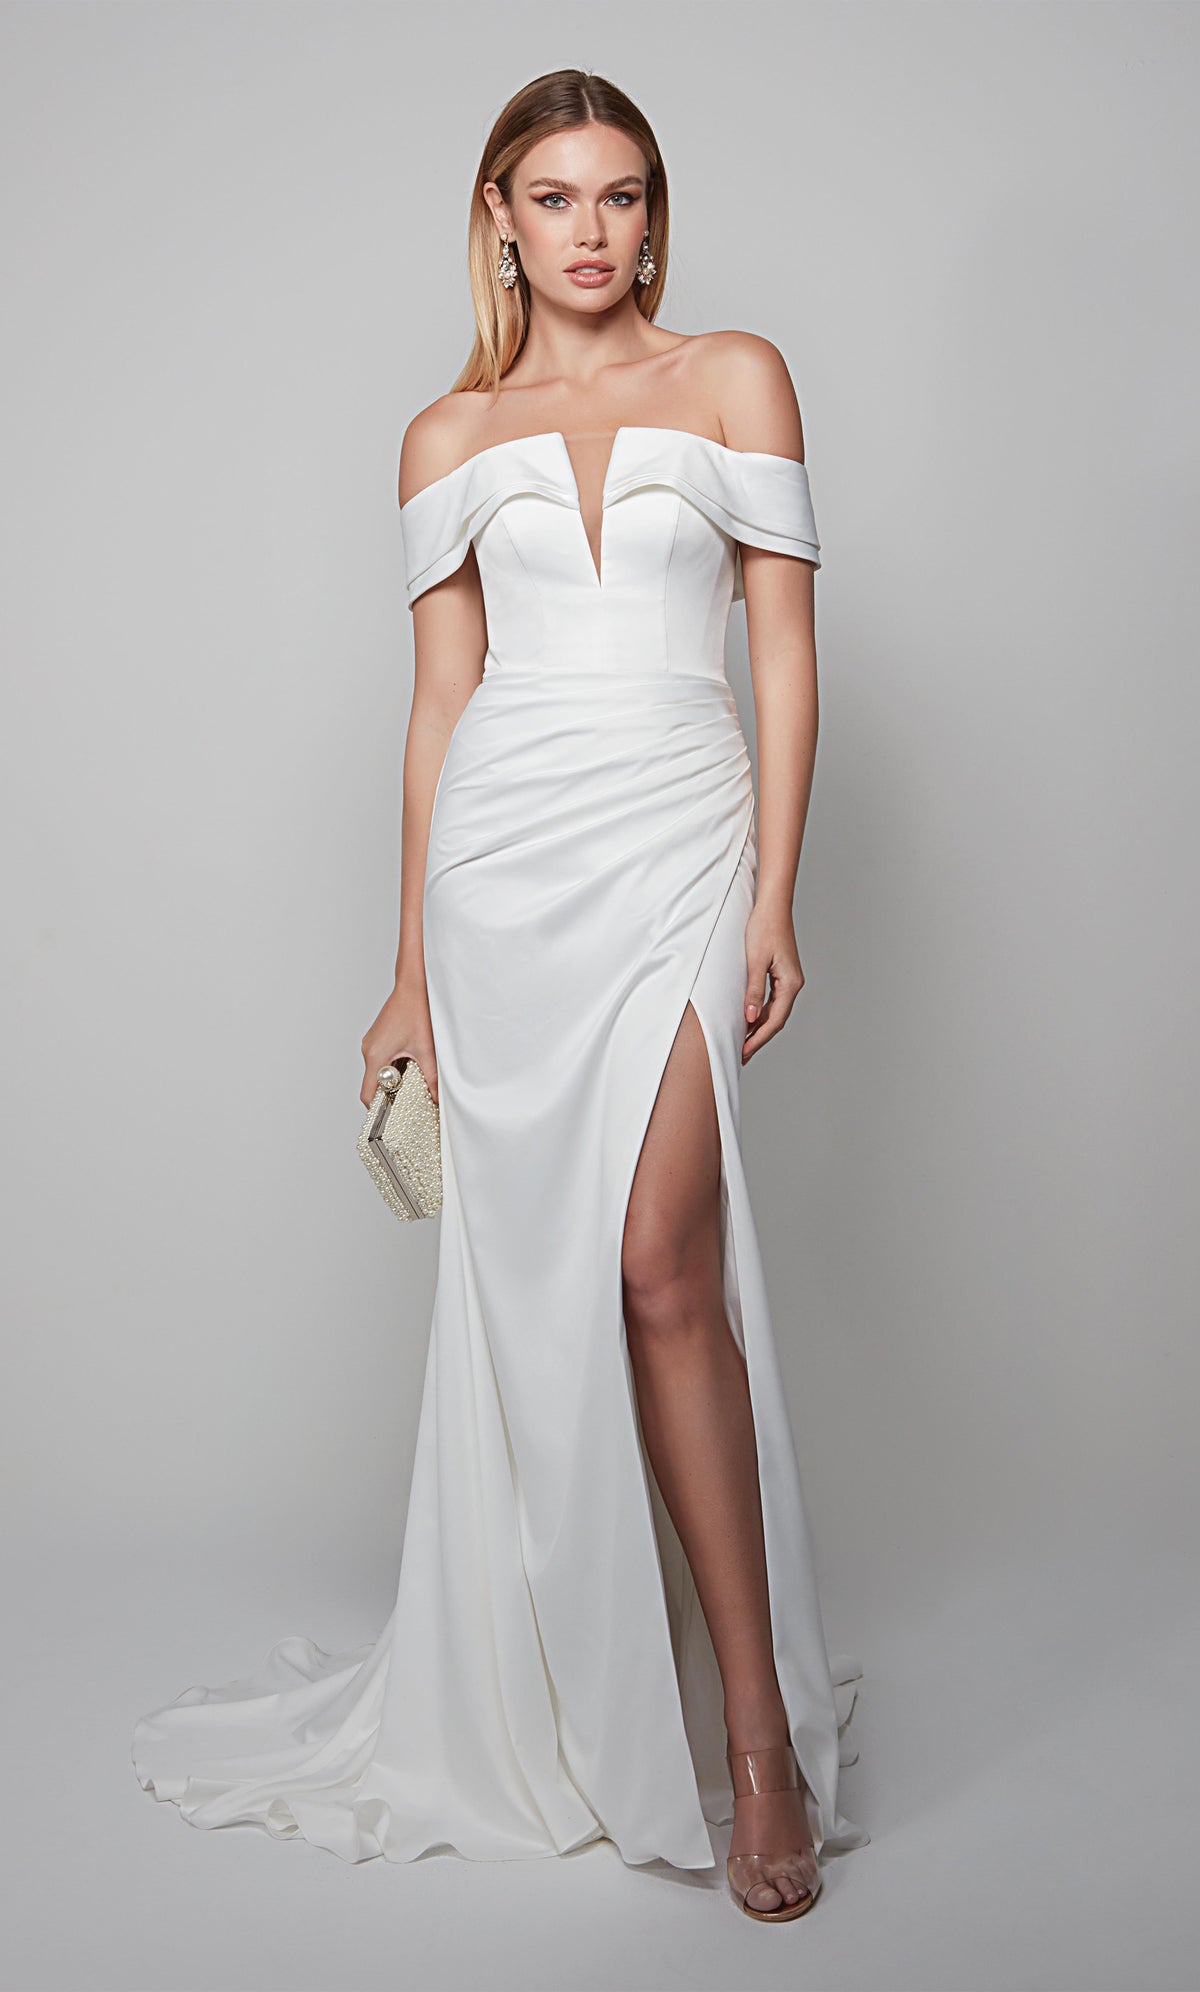 Elegant off the shoulder wedding gown with a plunging neckline, ruching detail, and side slit.